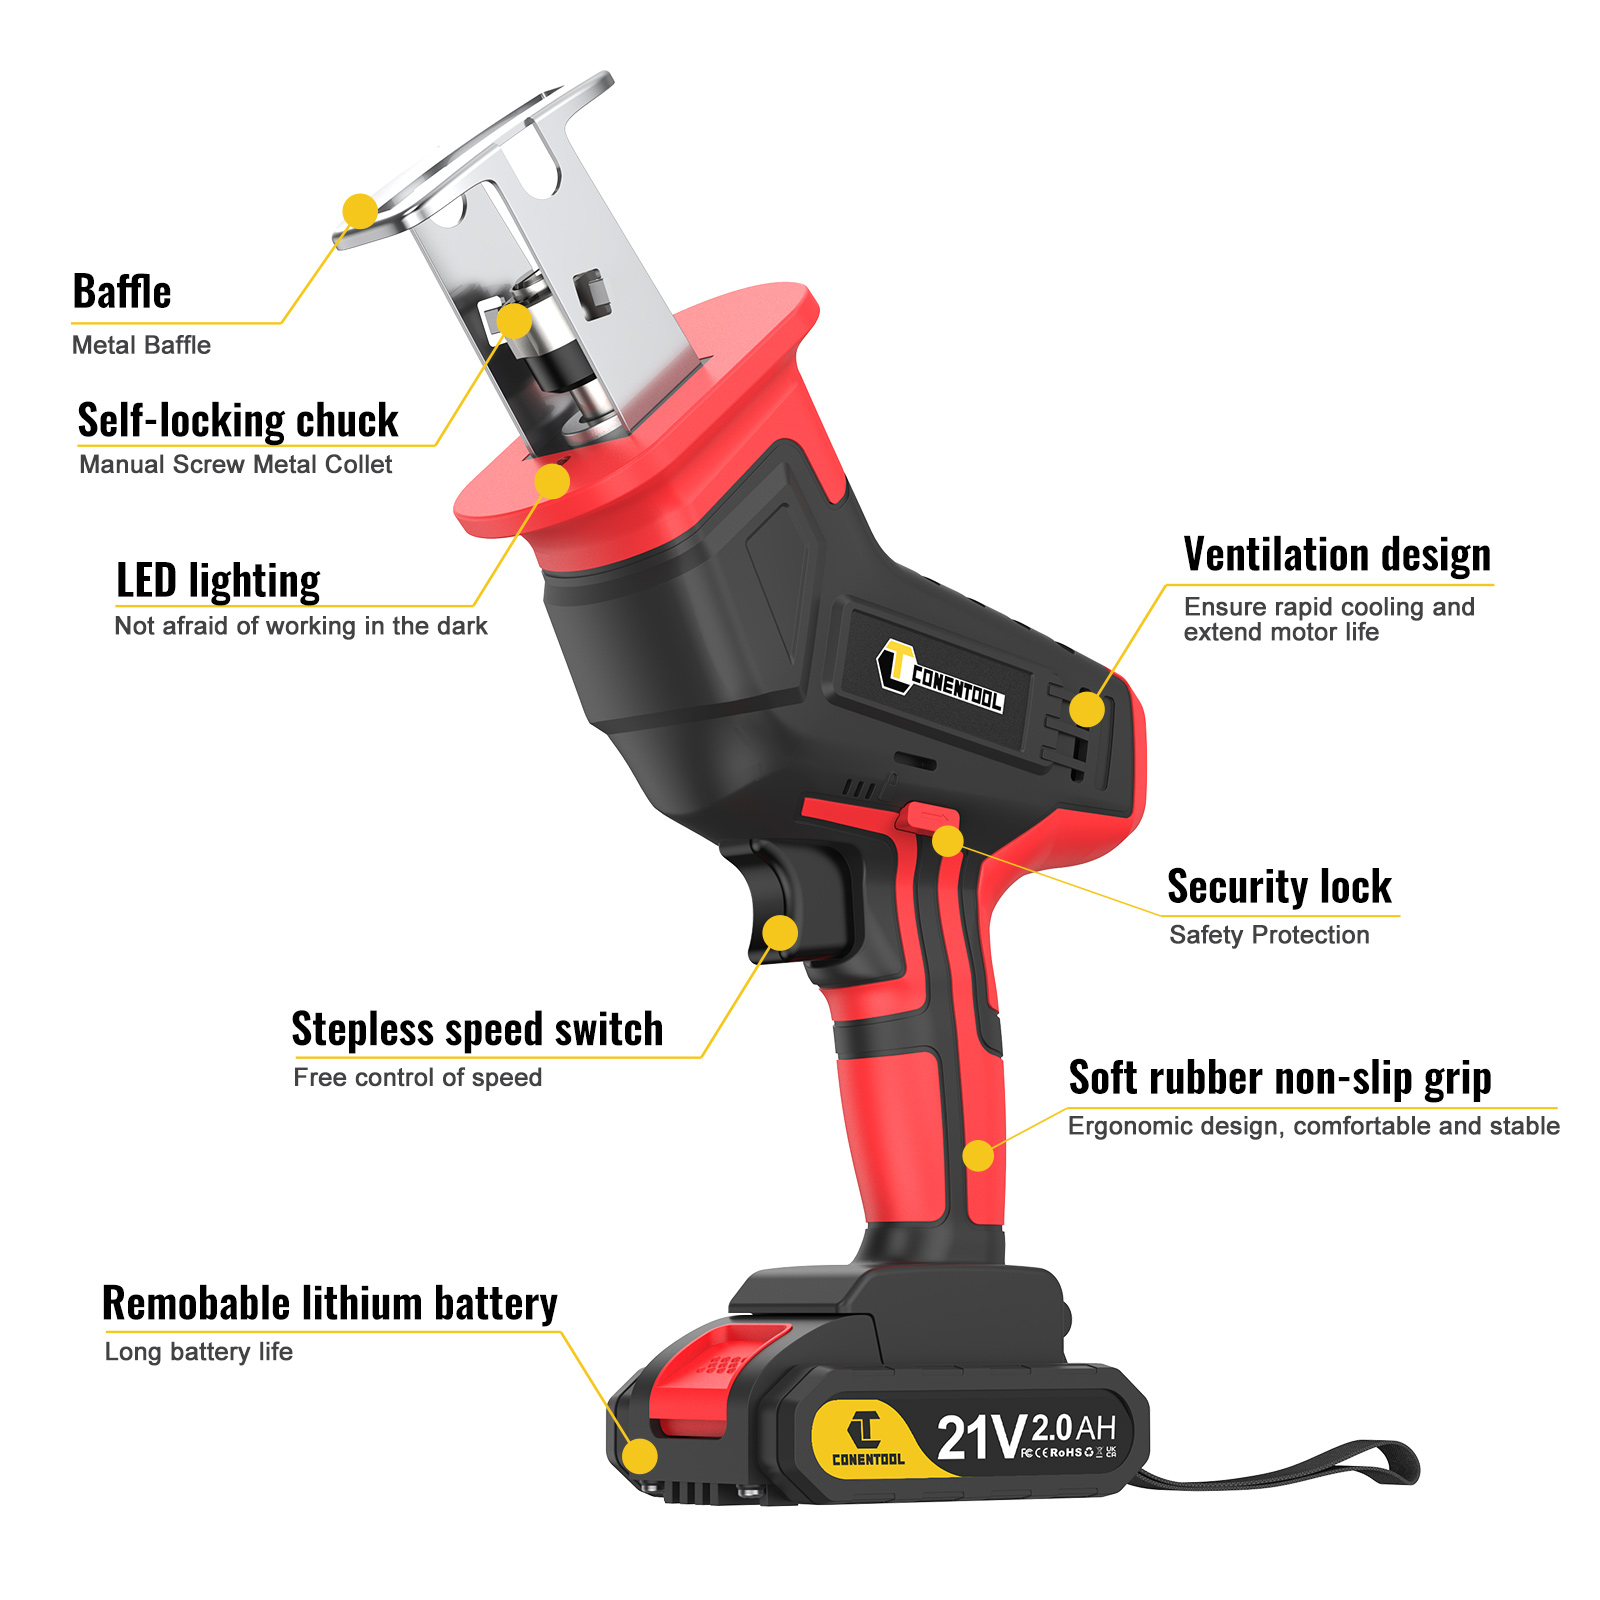 Conentool 21V Cordless Reciprocating Saw -load Speed 3800rpmWith  Rechargeable Battery, Wood Saw Blade, Metal Saw Blade,Electric Hand Saw 